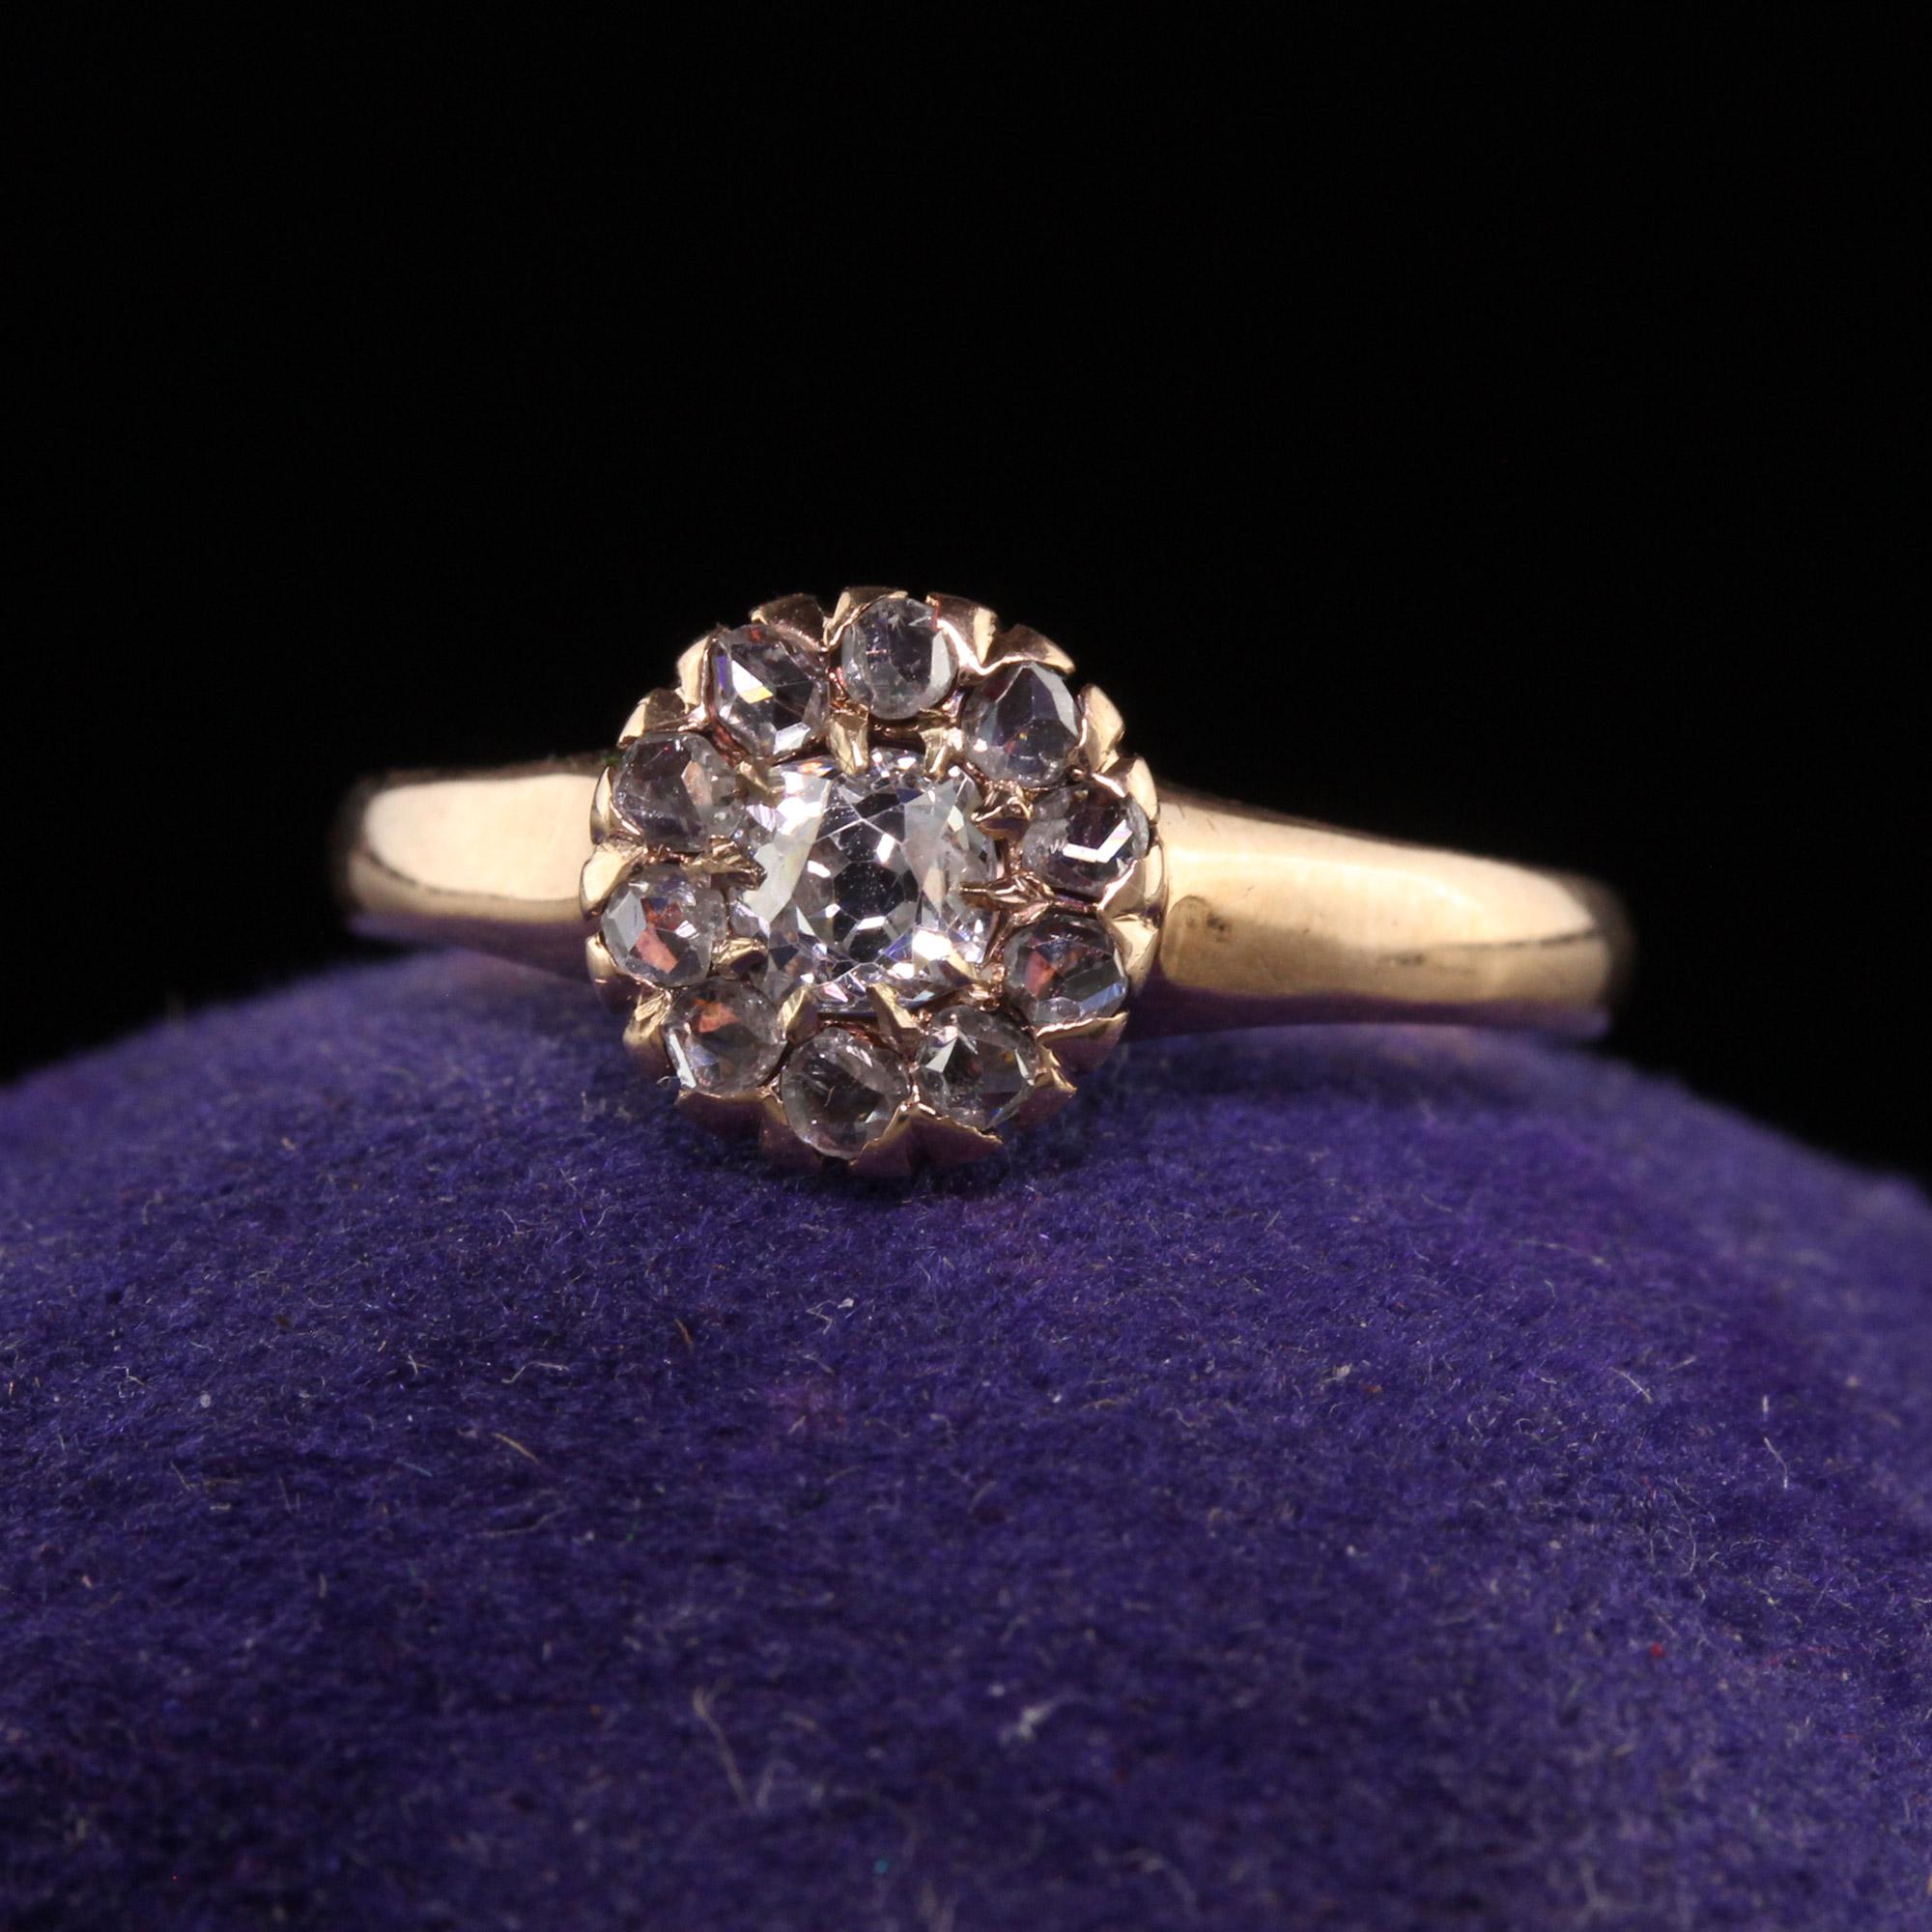 Beautiful Antique Victorian 10K Yellow Gold Old Mine Rose Cut Diamond Engagement Ring. This beautiful classic engagement ring is crafted in 10k yellow gold. The ring holds an old mine cut diamond in the center and is surrounded by rose cut diamonds.